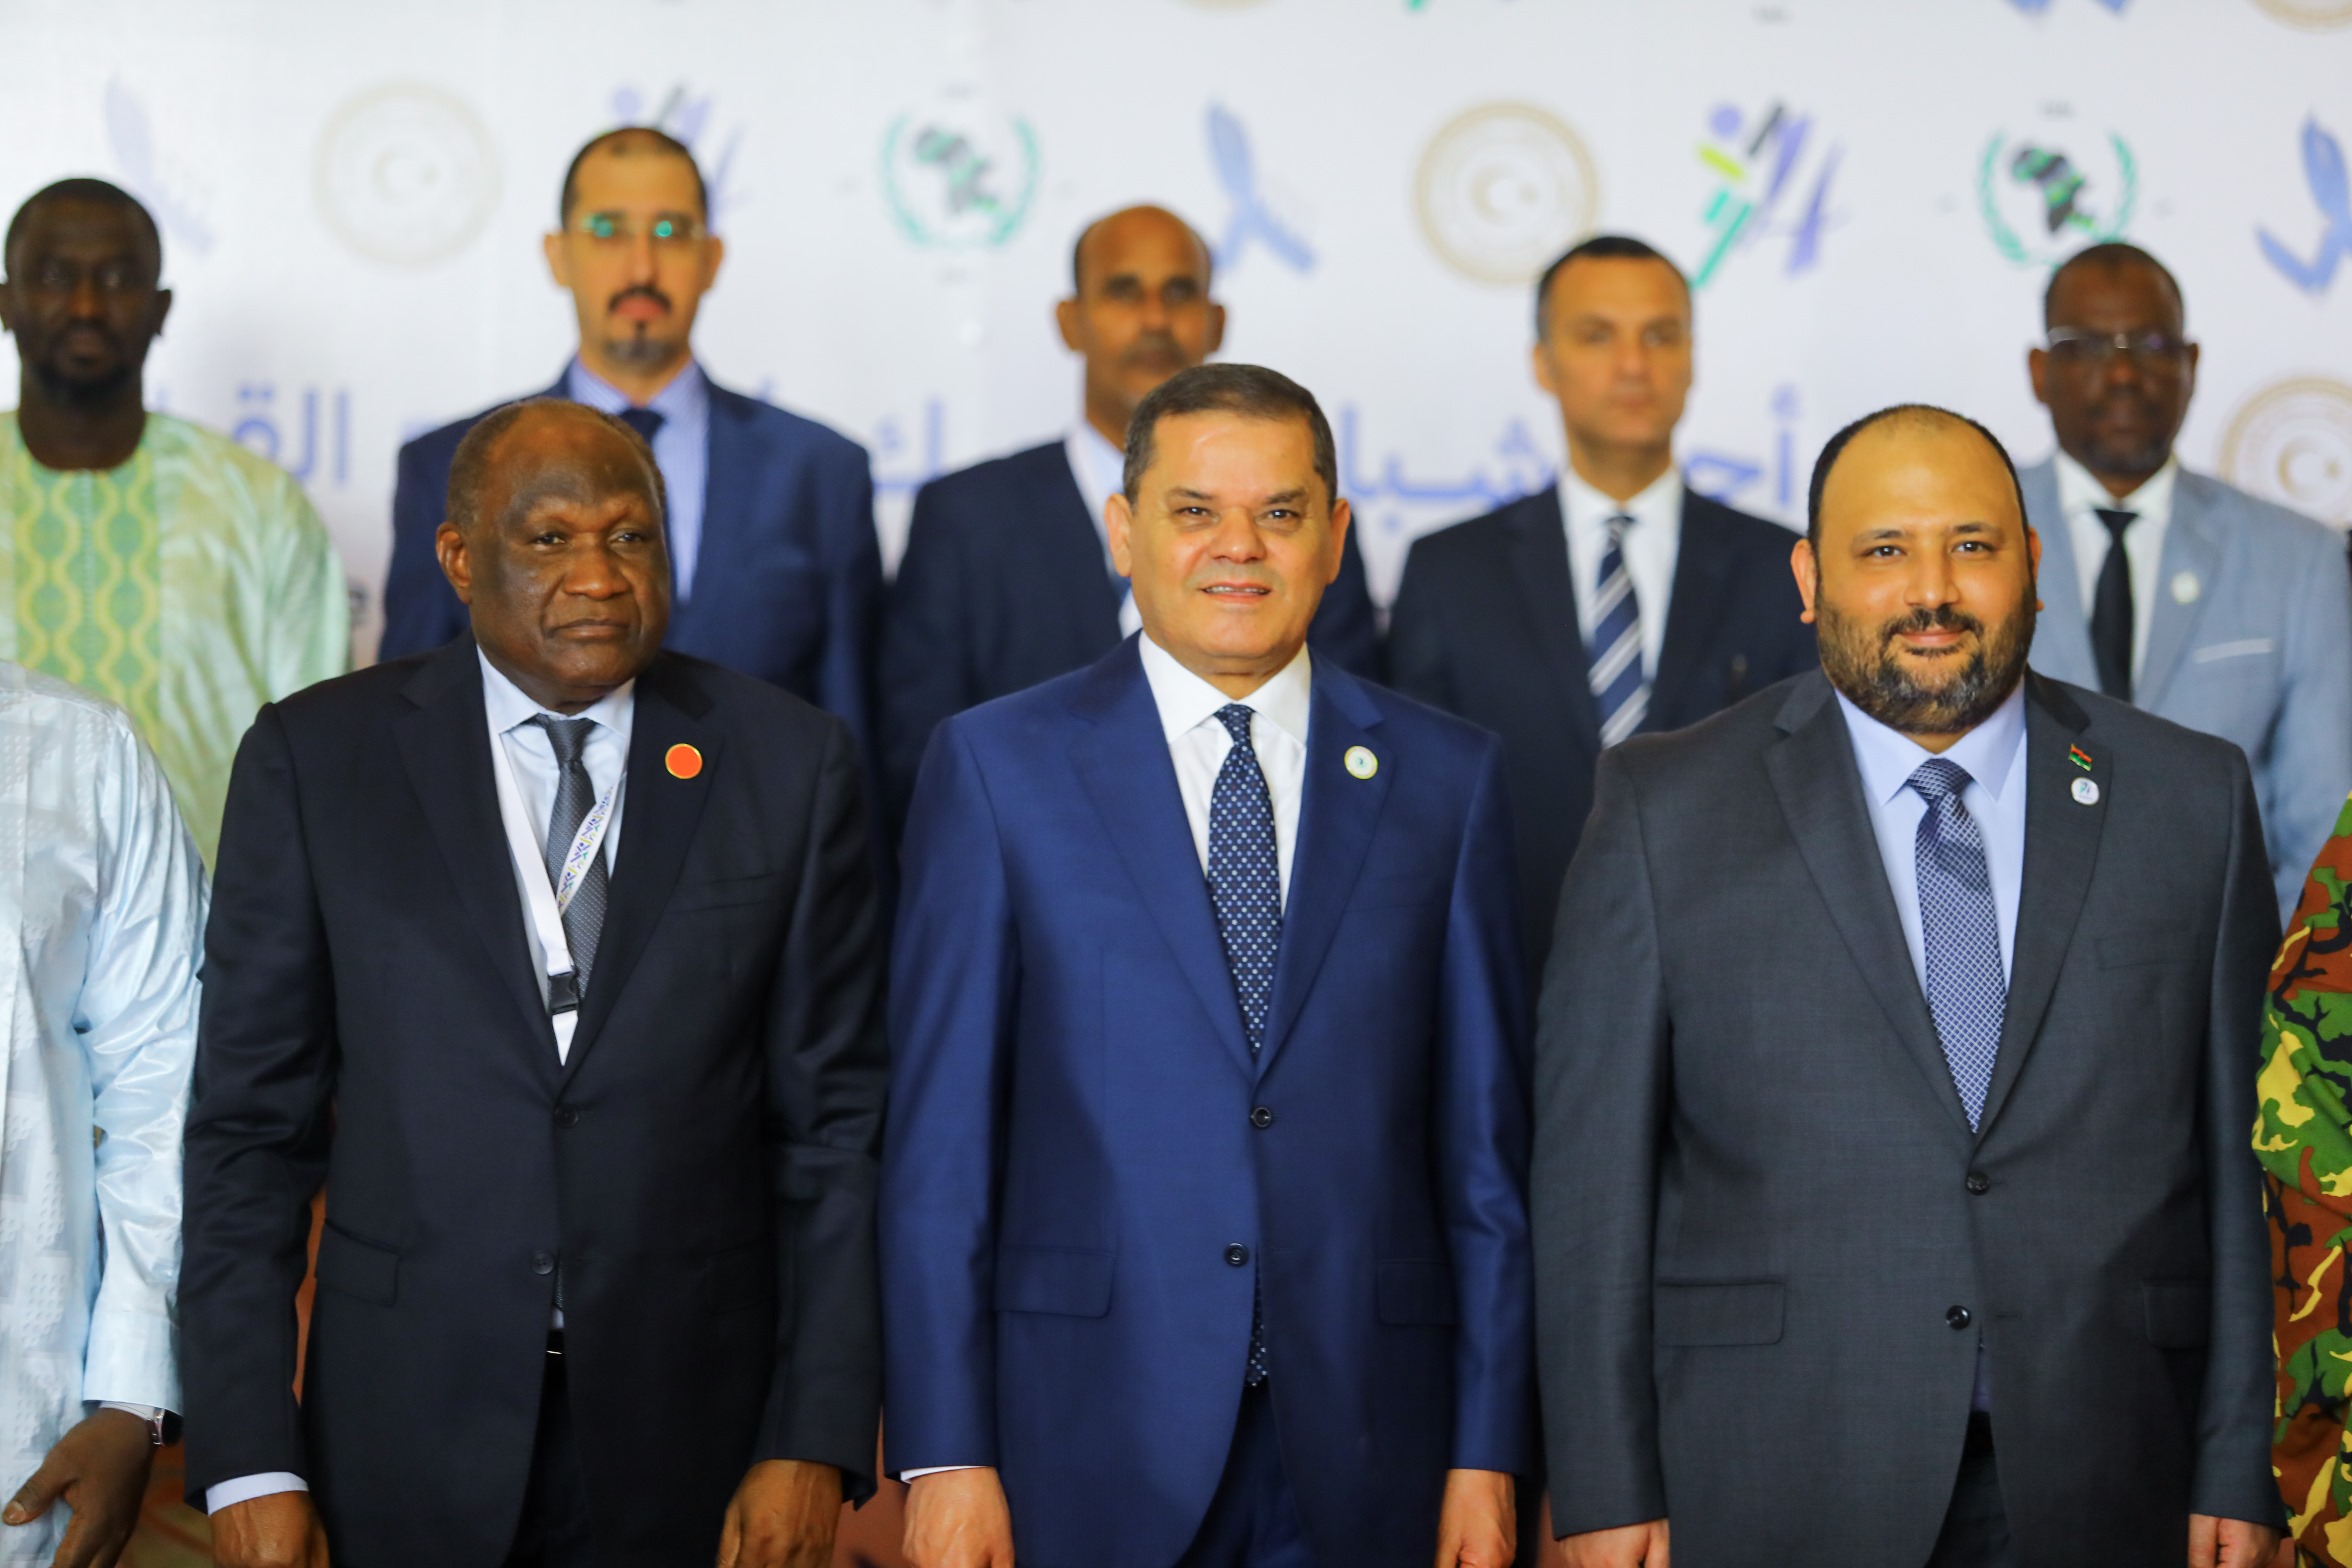 Kickoff of the Fourth Meeting of Ministers of Youth and Sports of the Sahel and Sahara Group (CEN-SAD) in Tripoli